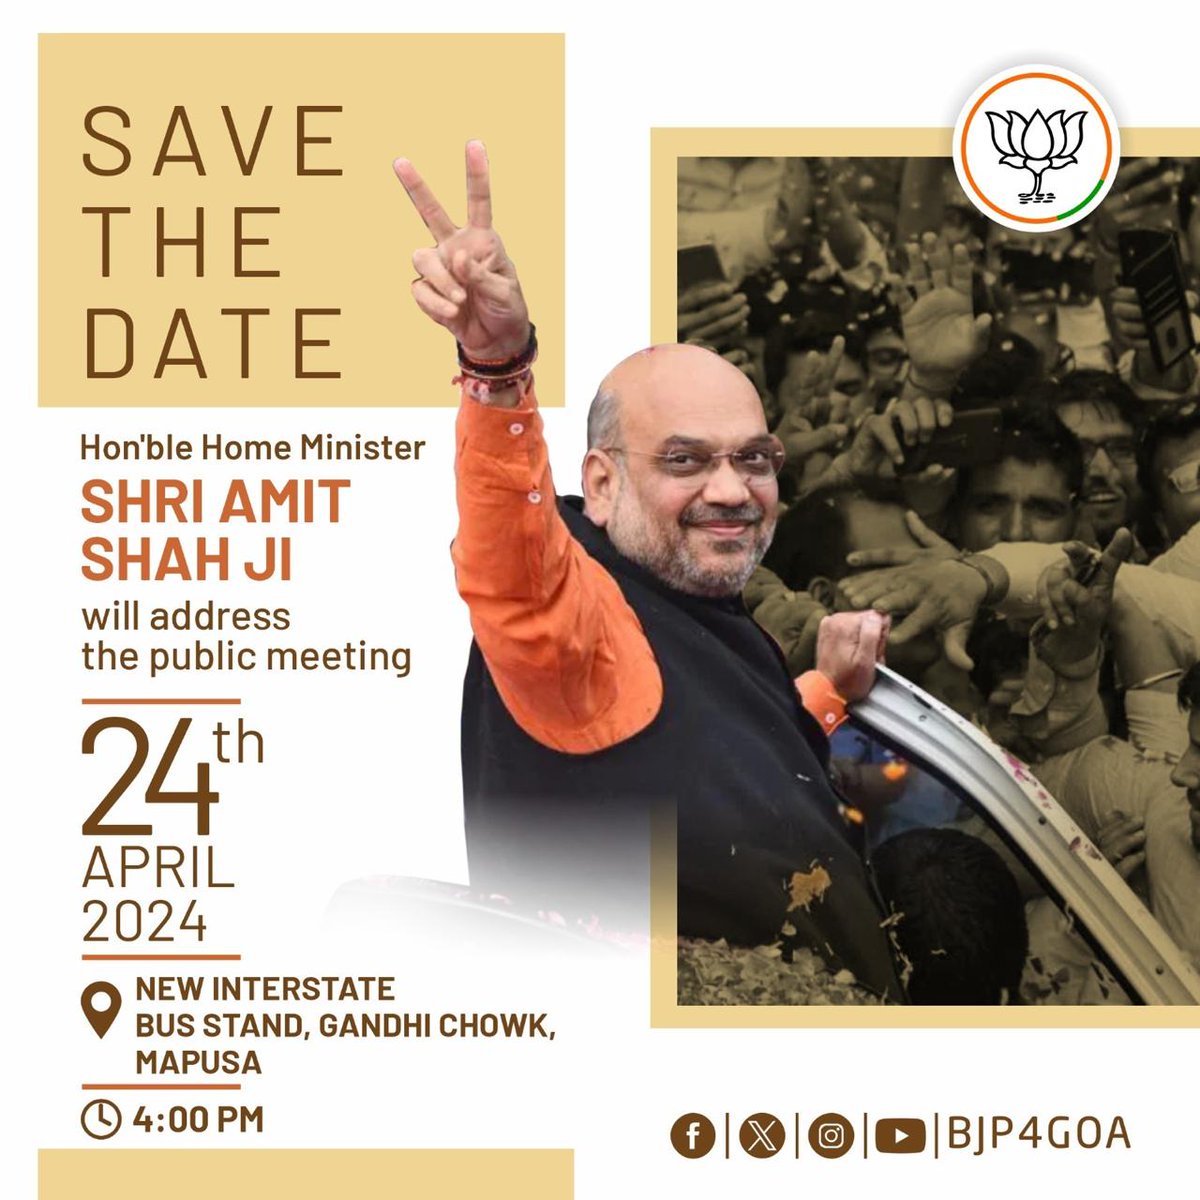 Welcoming Hon'ble Home Minister, Shri @AmitShah ji to Goa as he will be addressing a public meeting on April 24th, 4 pm, at the New Interstate Bus Stand, Gandhi Chowk, Mapusa. Let's come together in large numbers to welcome him & show our unwavering support.